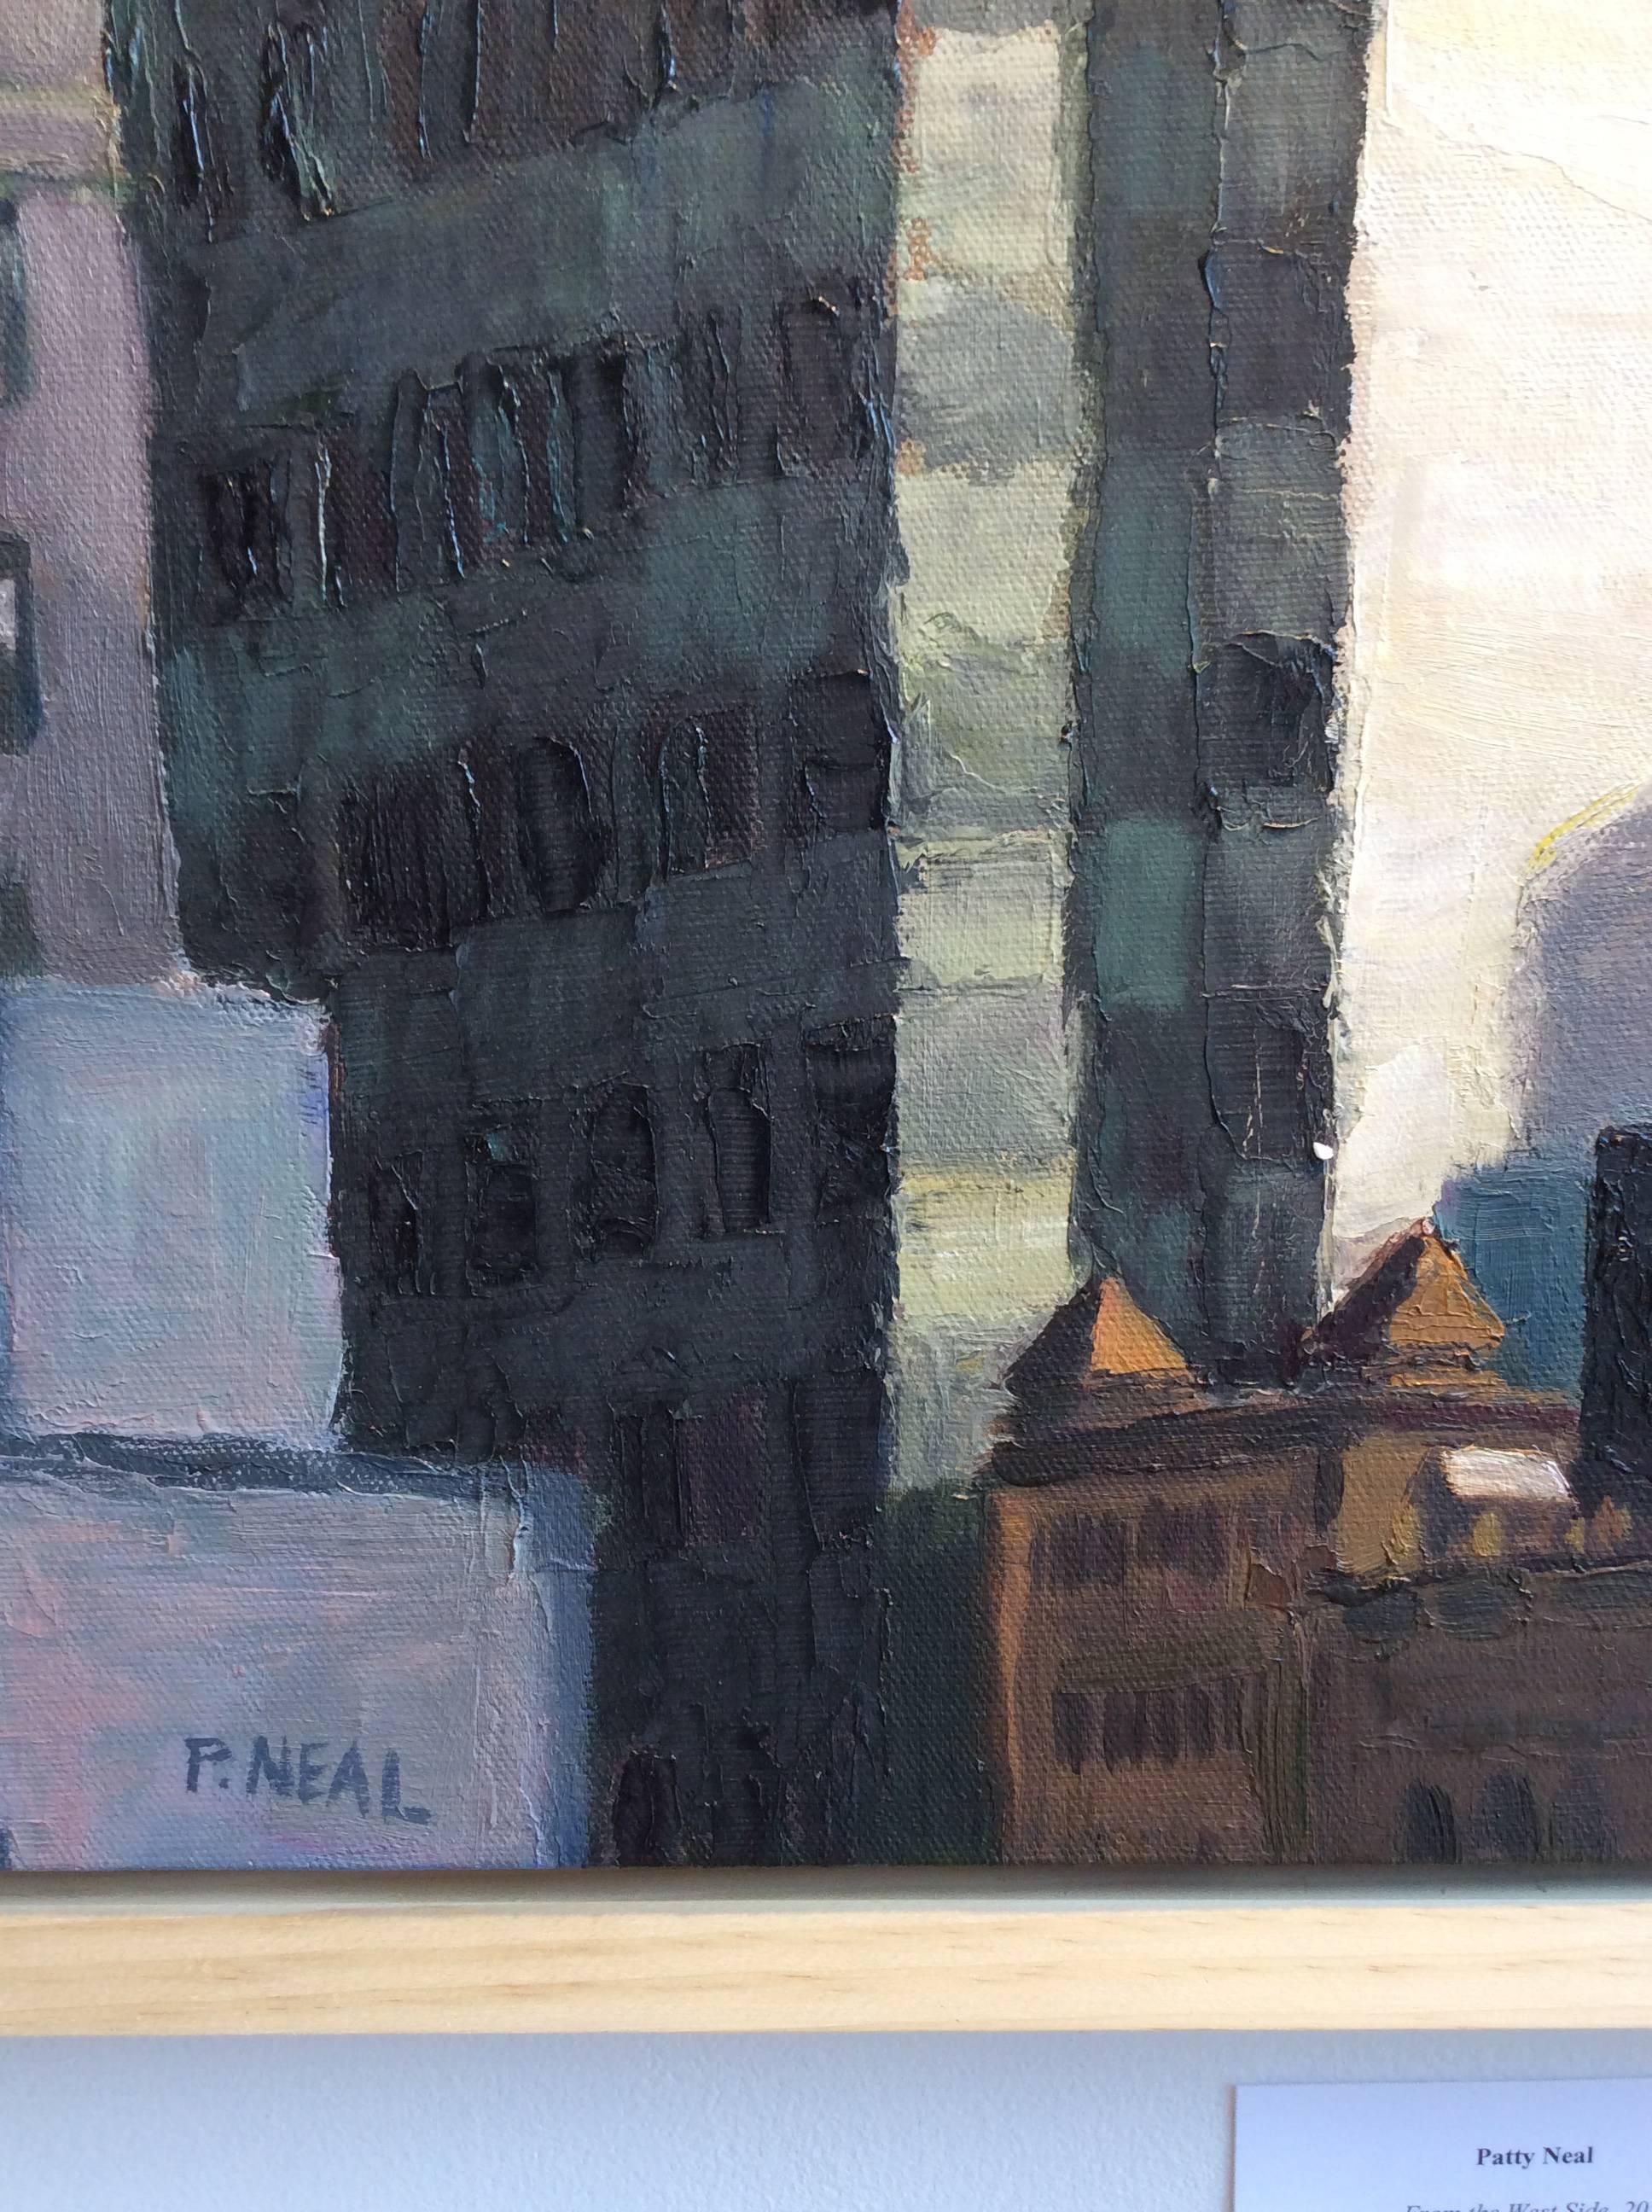 Contemporary cityscape painting of New York City's West Side 
Oil on canvas in light wood frame
24 x 19 inches, 26 x 20 inches

This contemporary oil painting depicting a metropolitan view is the work of realist painter Patty Neal. The painting